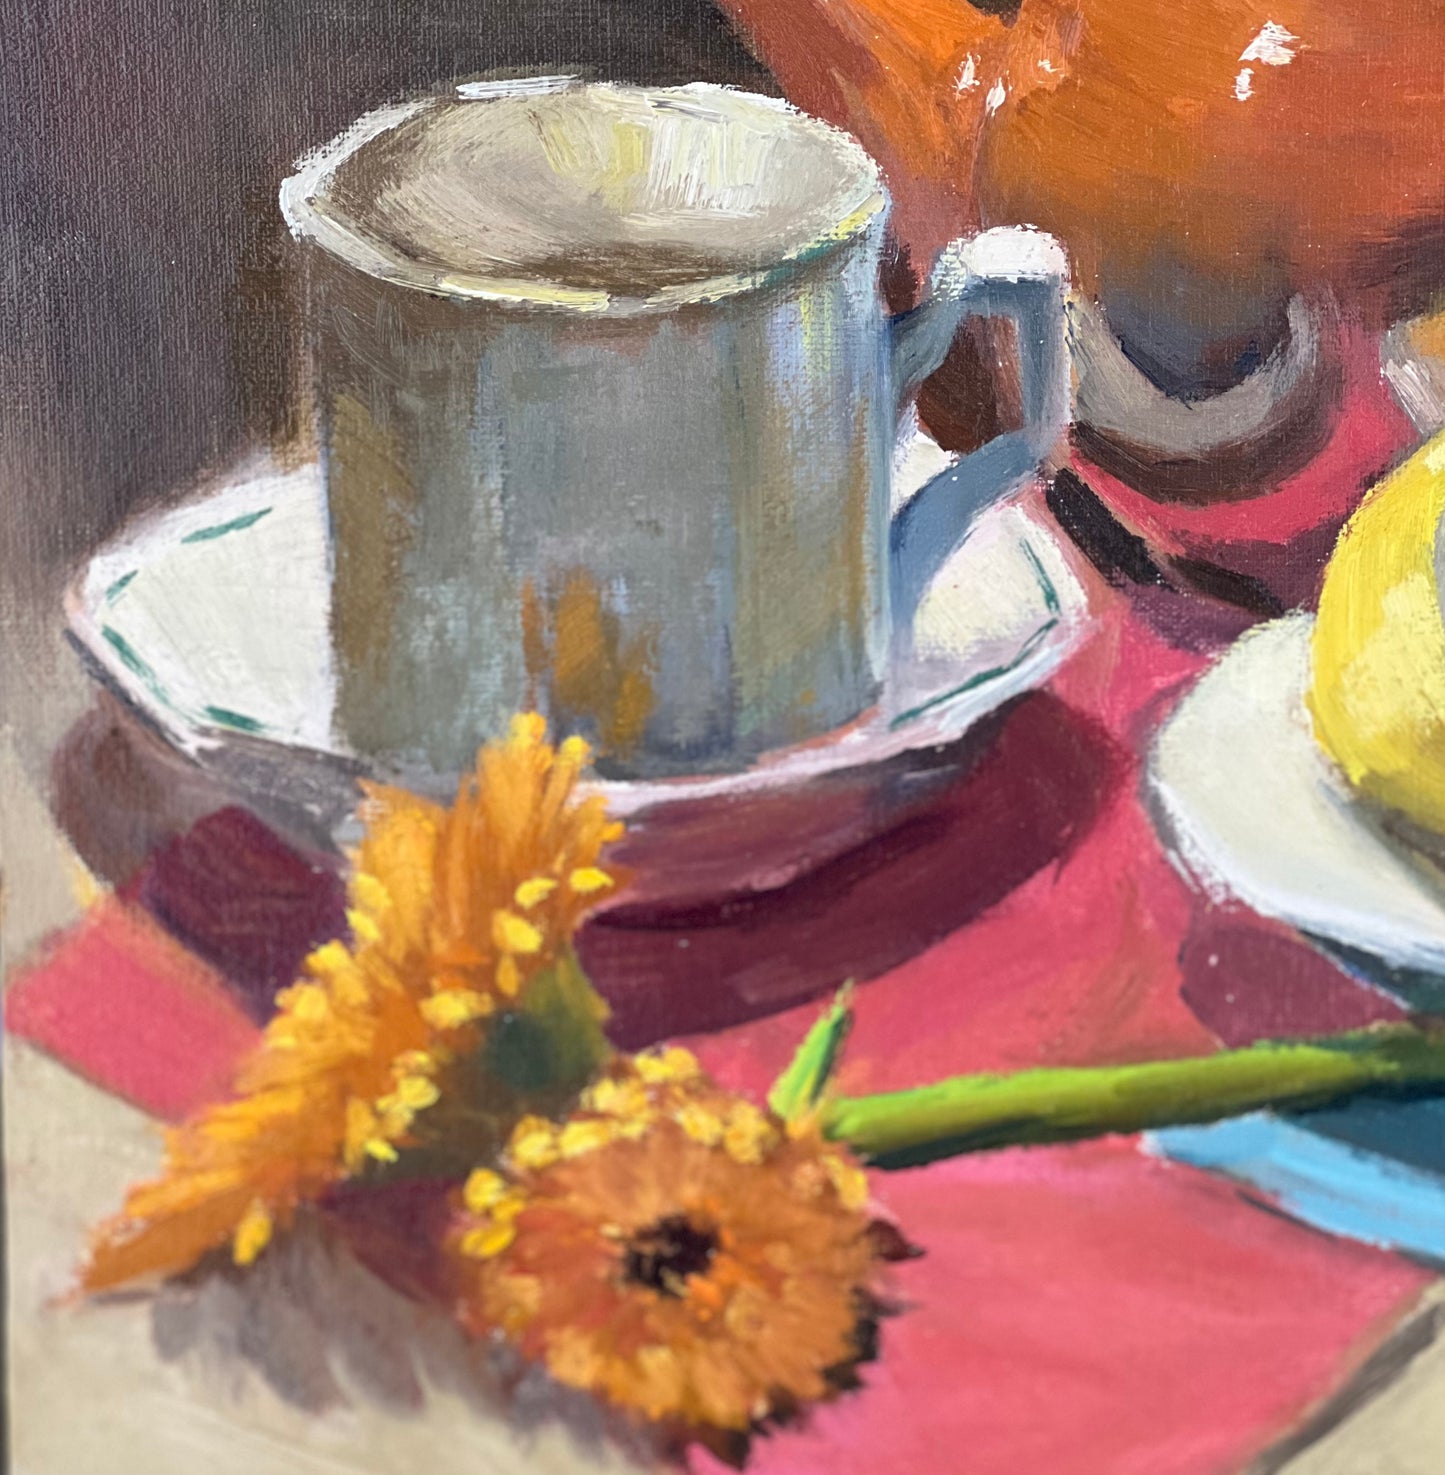 Tea Time with Lemons! - Large Still Life Oil Painting